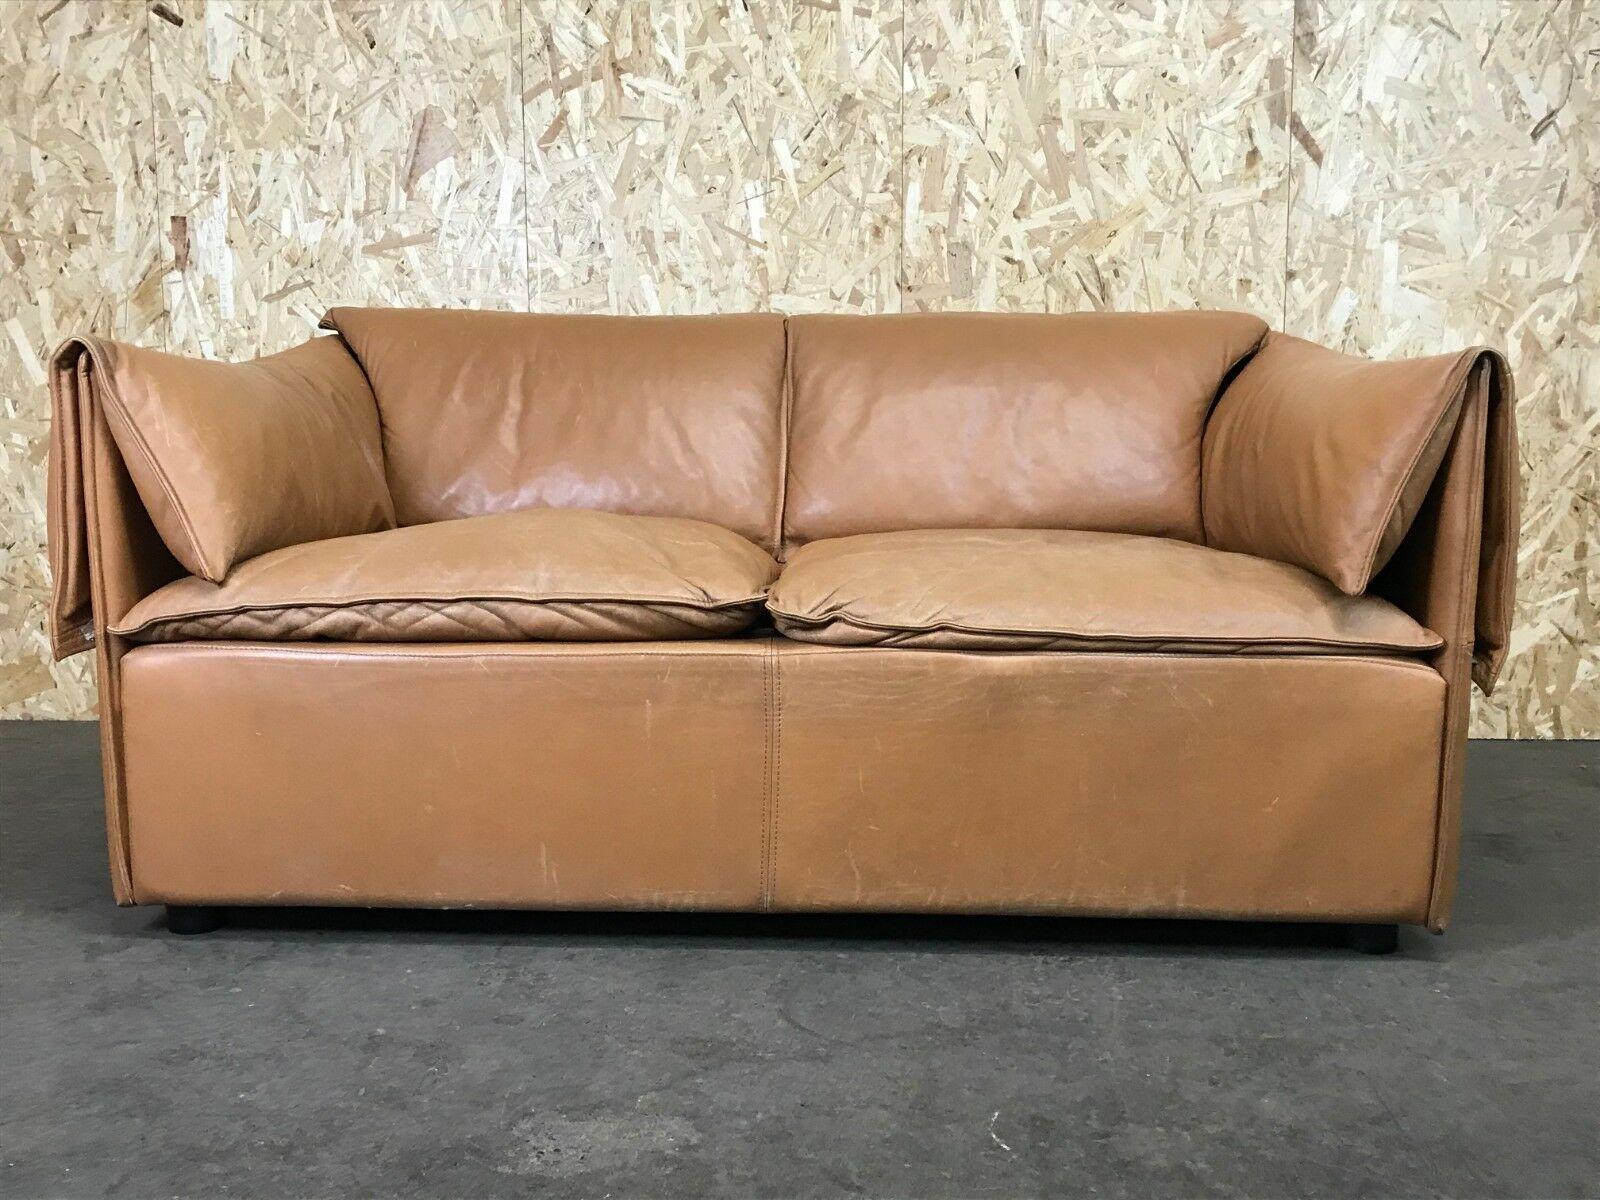 70s sofa 2 seater leather sofa Niels Bendtsen Lotus for N. Eilersen Danish Design

Object: sofa

Manufacturer: N. Eilersen

Condition: vintage

Age: around 1960-1970

Dimensions:

150cm x 90cm x 69cm
Seat height = 41cm

Other